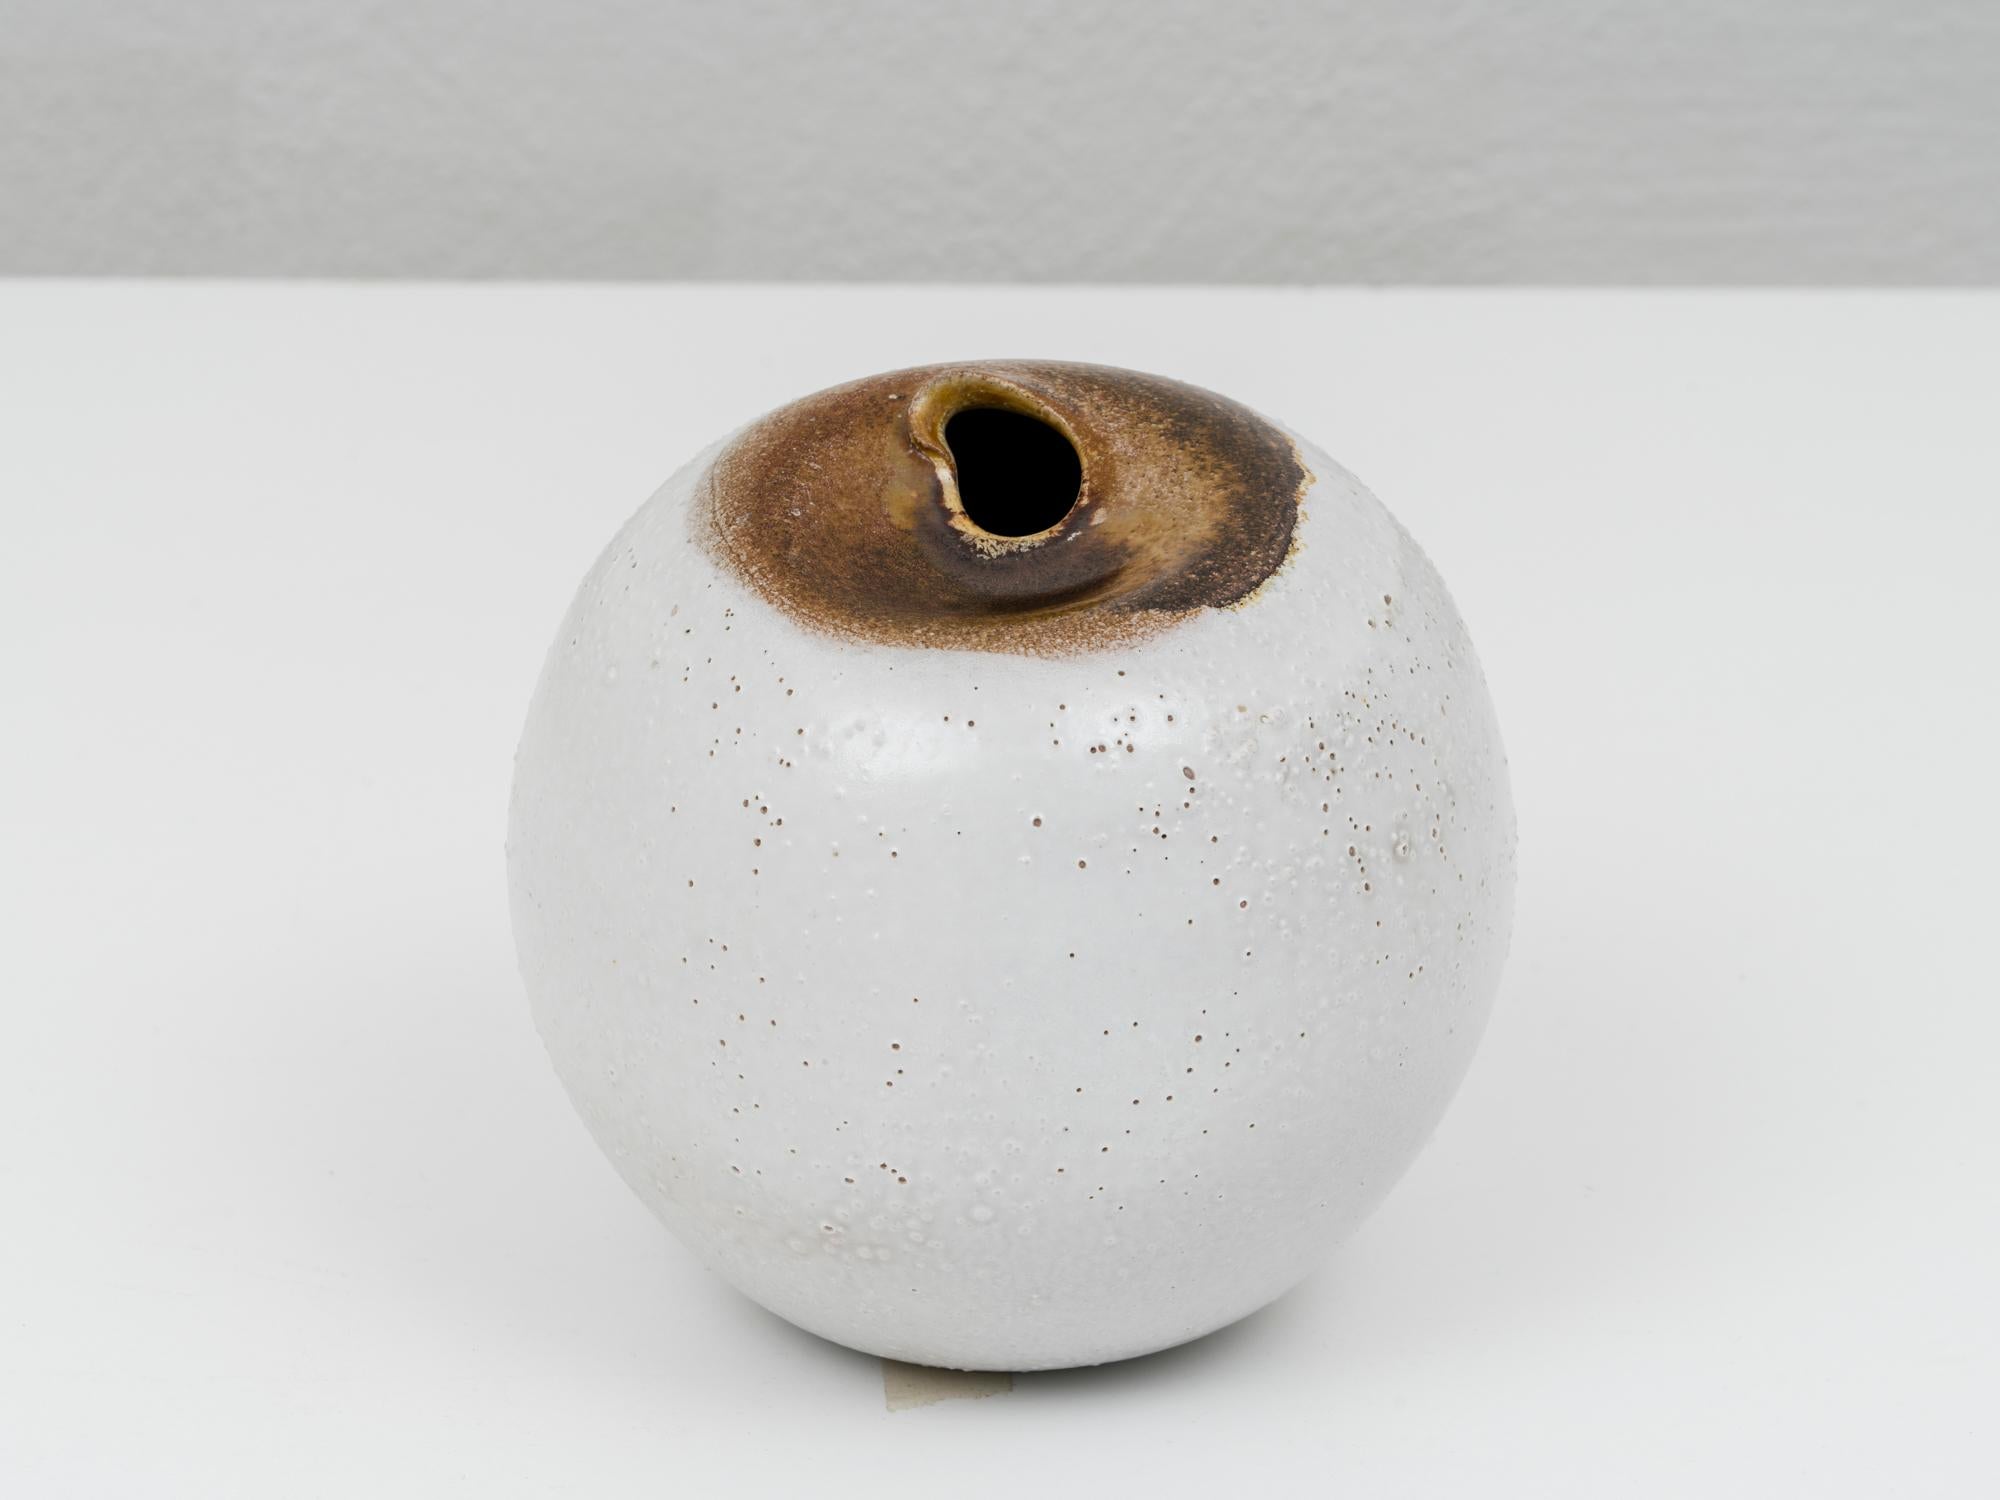 Postmodern ceramic vase by Pino Castagna, in the tones of white and brown, with a tactile finishing with purposeflly created cooking bubbles. This piece was manufactured in the artist's laboratoy in Costermano, near the Garda lake, in the 1990s. It